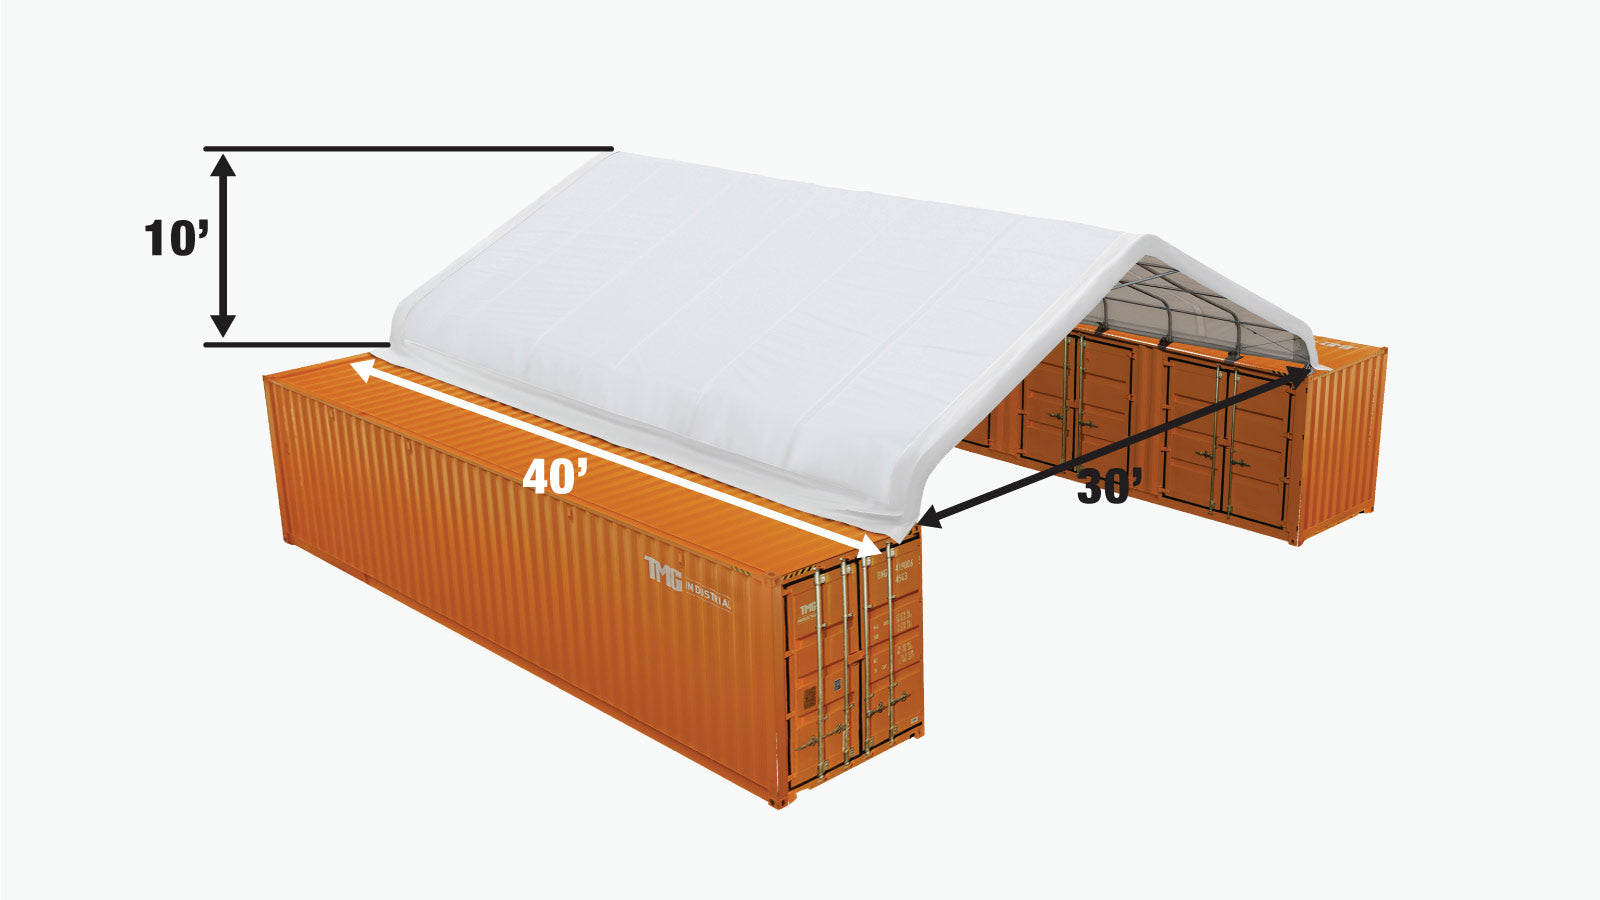 TMG Industrial 30' x 40' PE Fabric Pro Series Container Peak Roof Shelter, Fire Retardant, Water Resistant, UV Protected, TMG-ST3041CE(Previously TMG-ST3040CE)-specifications-image